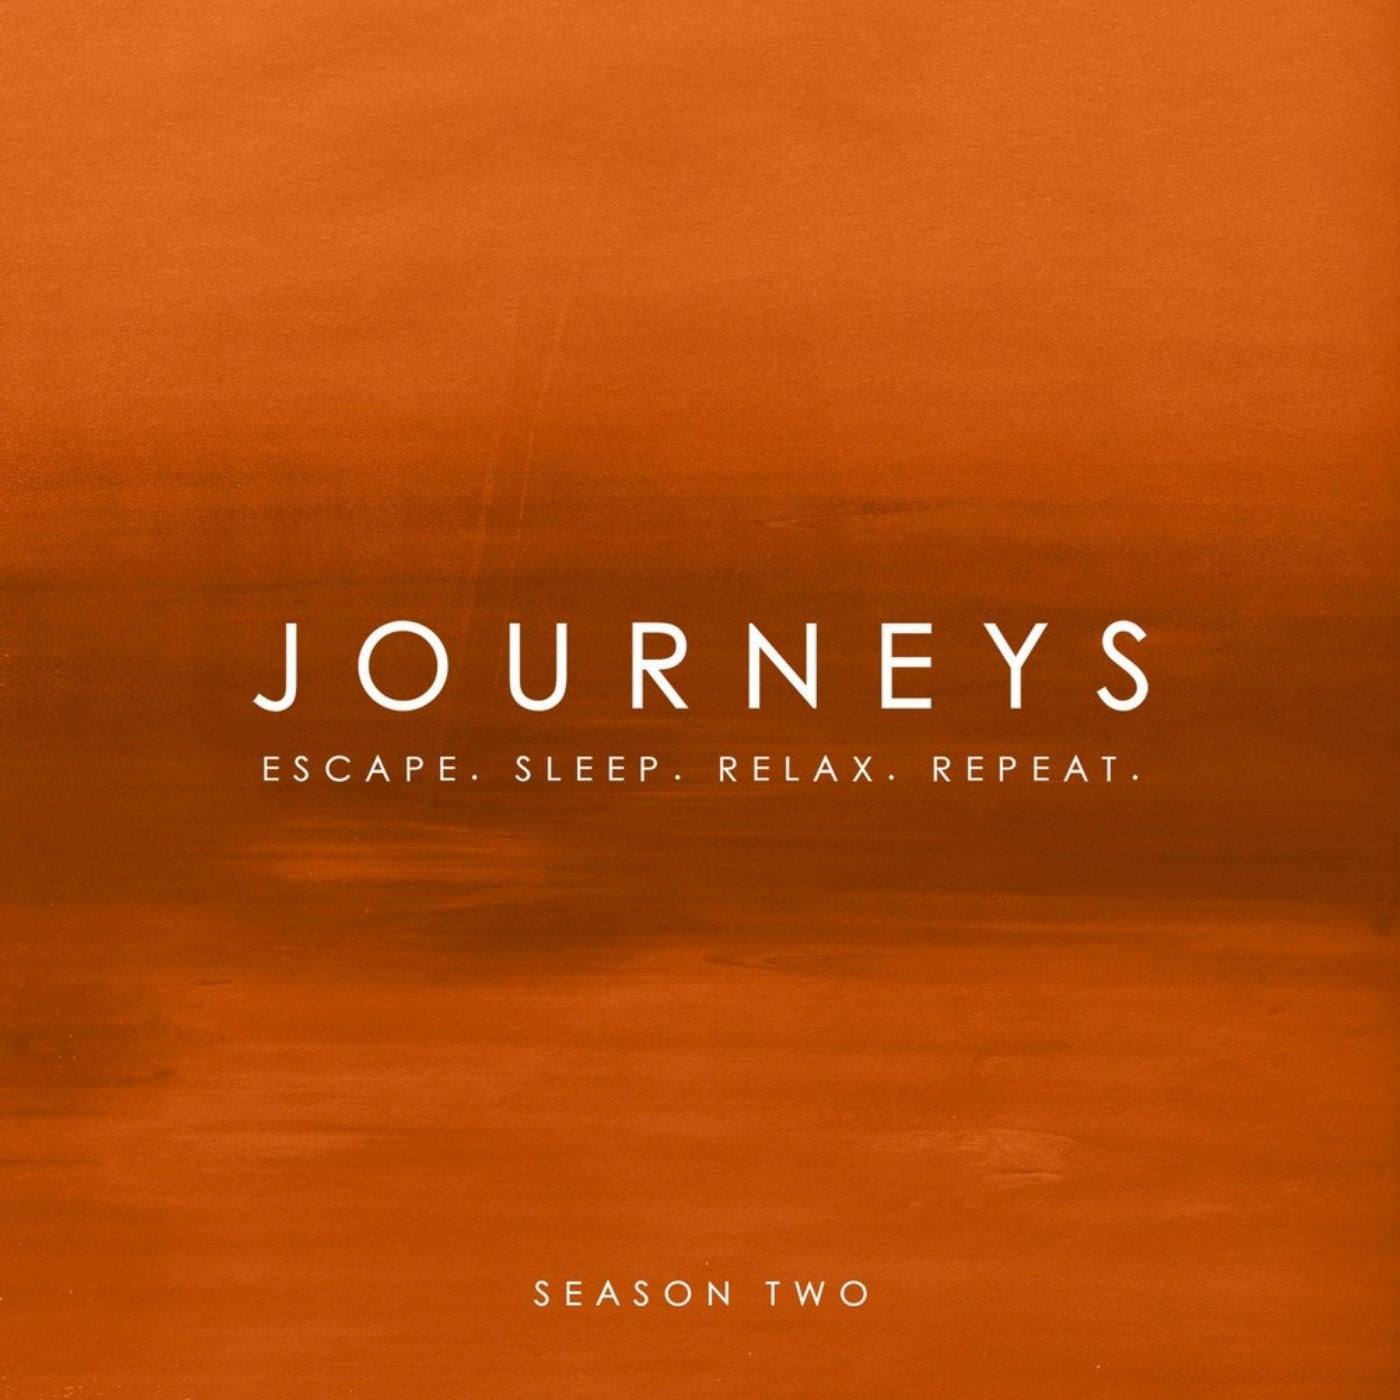 Journeys - Escape. Sleep. Relax. Repeat. - Season Two (Continuous Mix)